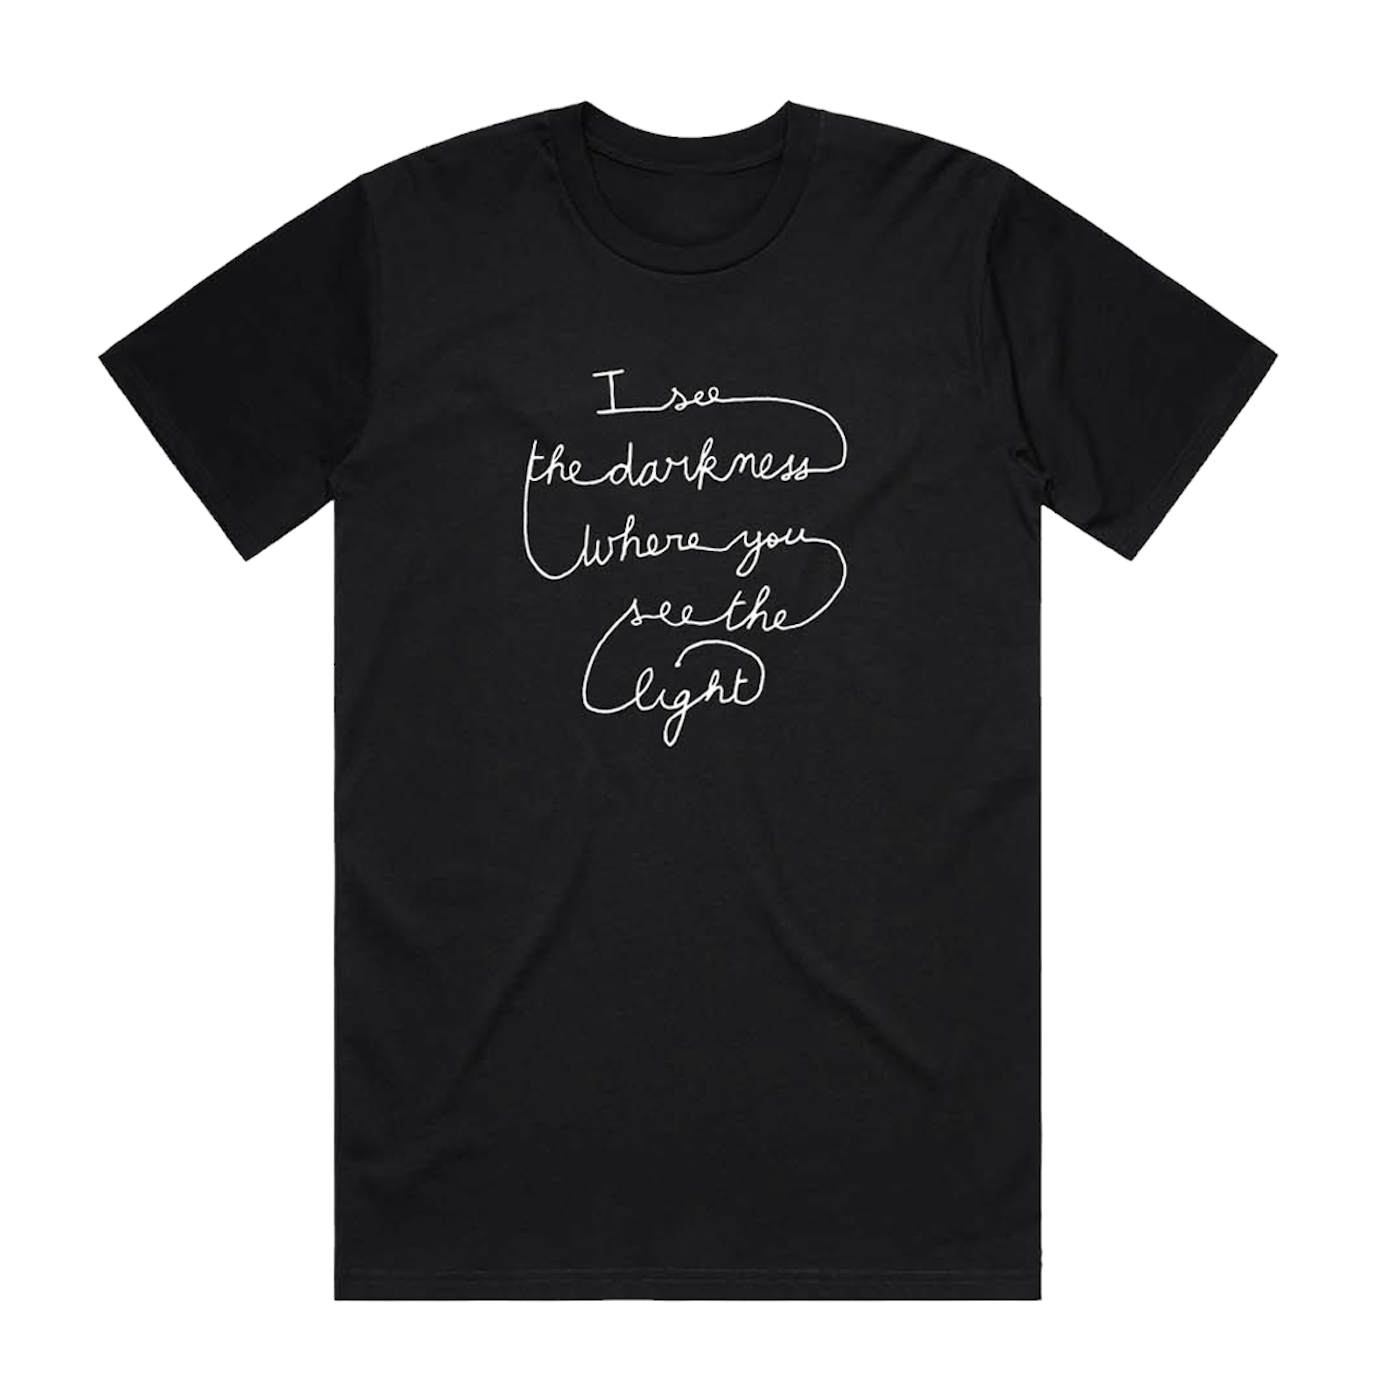 Tom Odell 'I see the darkness' T-shirt Black